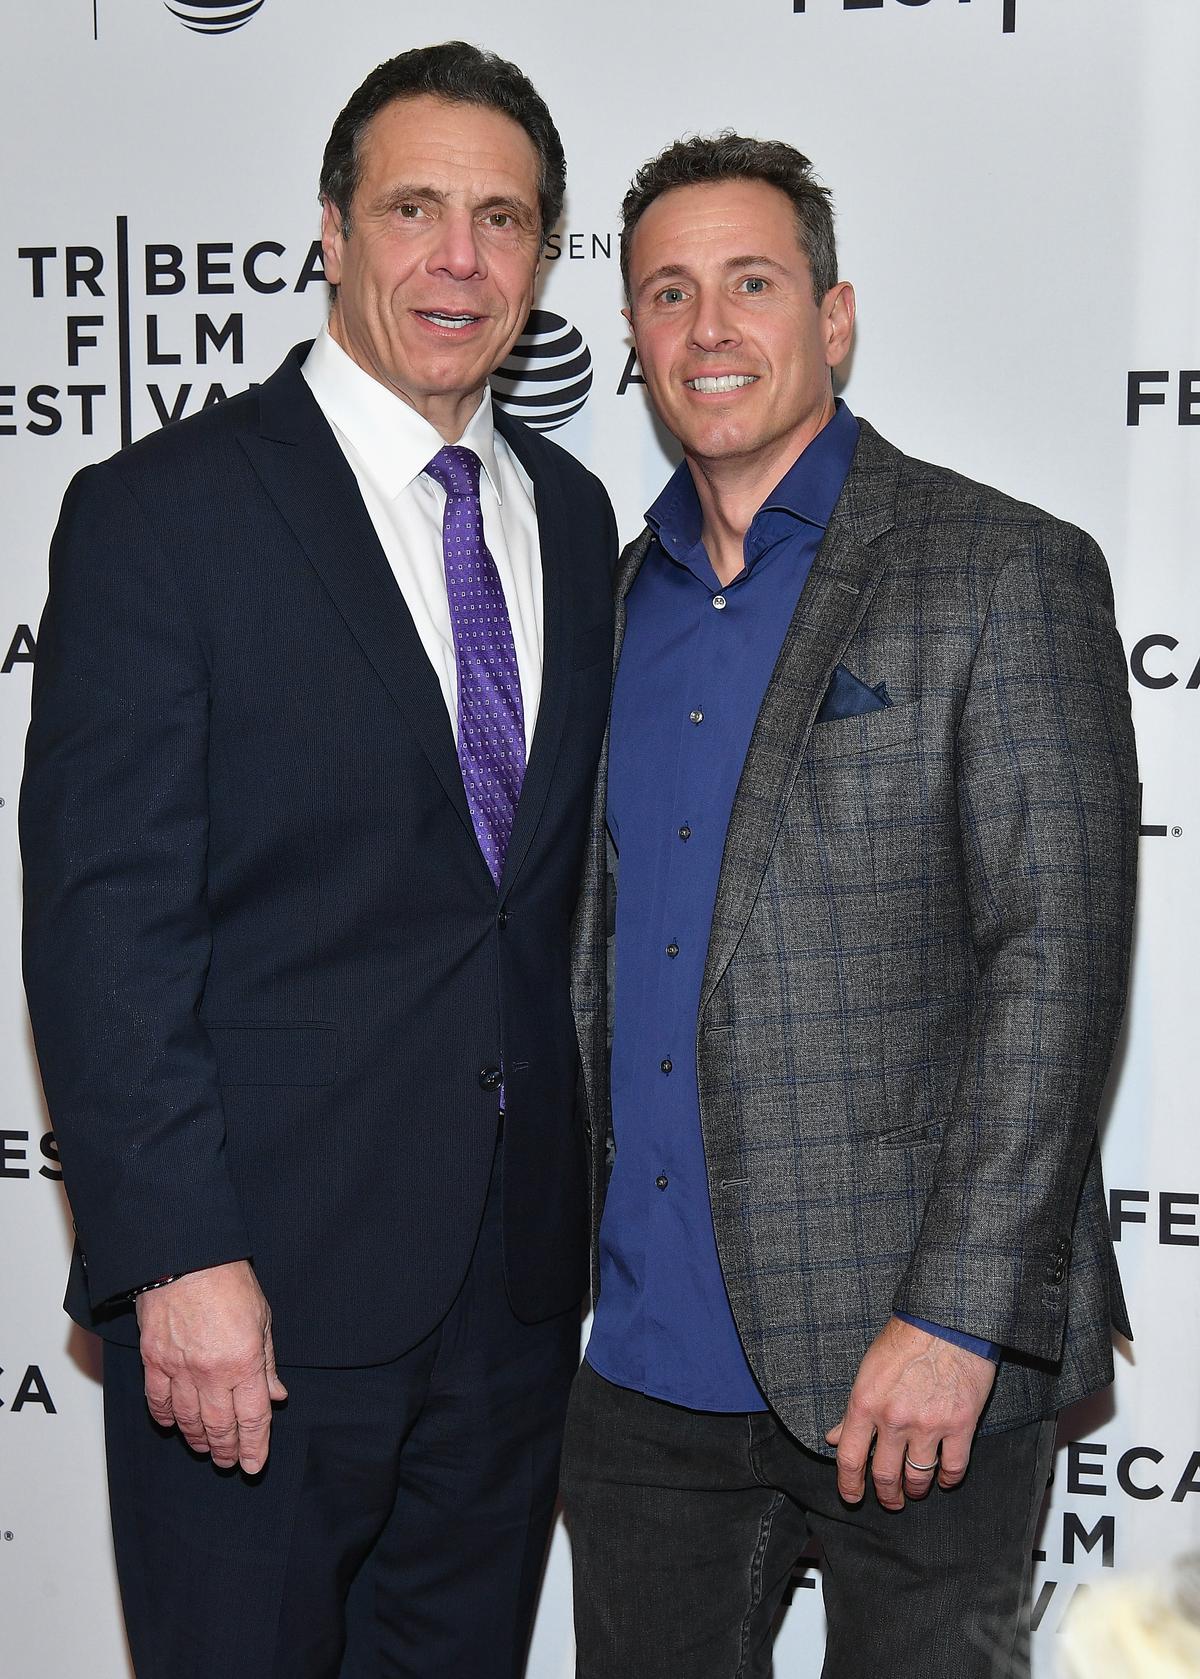 New York Gov. Andrew Cuomo, left, and his brother Chris Cuomo, a CNN anchor, at an event in New York City in 2018. (Dia Dipasupil/Getty Images for Tribeca Film Festival)